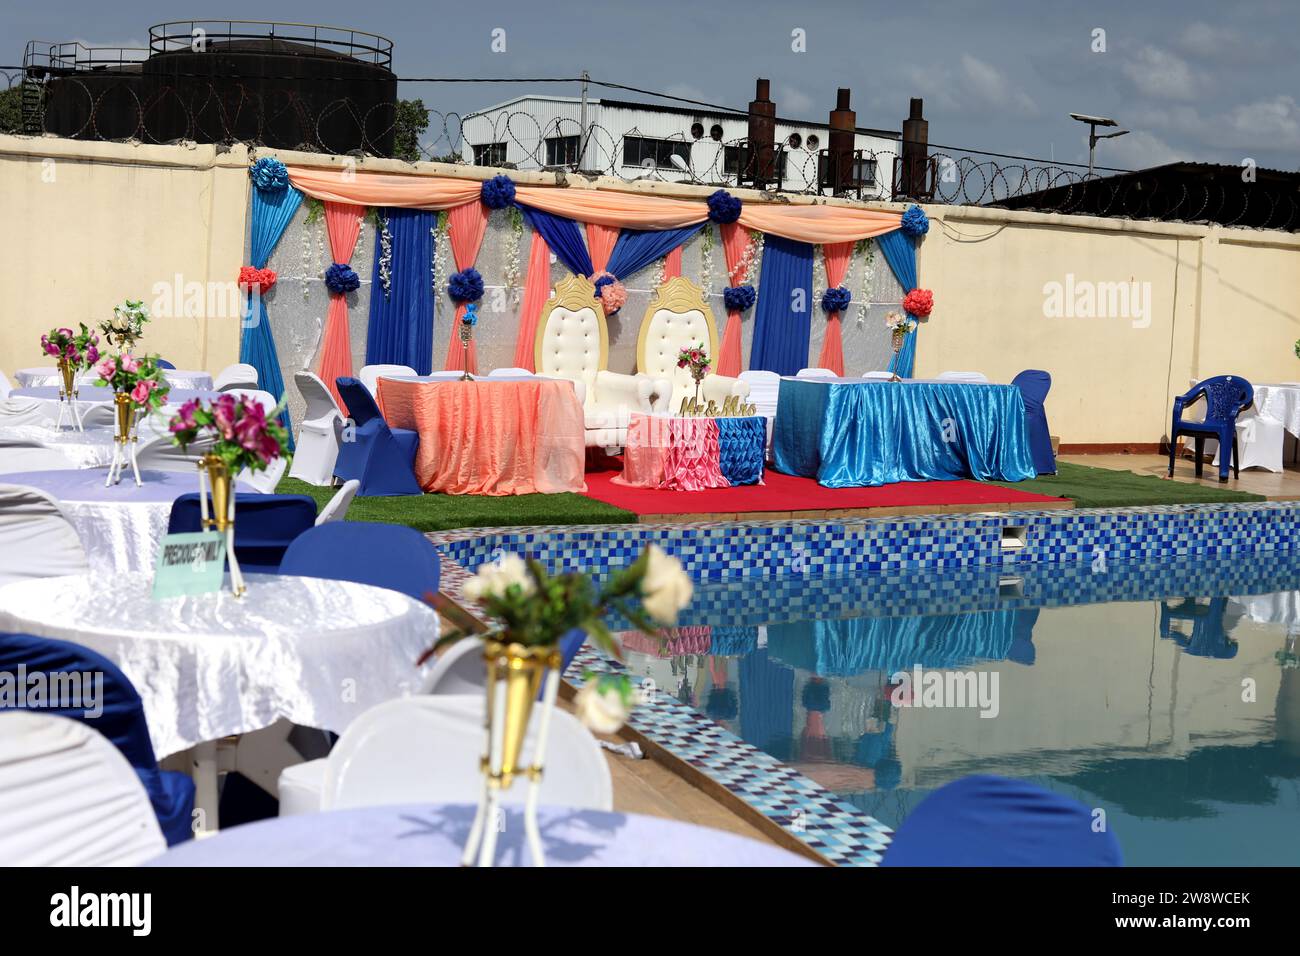 Colourful wedding breakfast party set-up by a pool on a wedding day in Freetown, Sierra Leone, Africa. Stock Photo